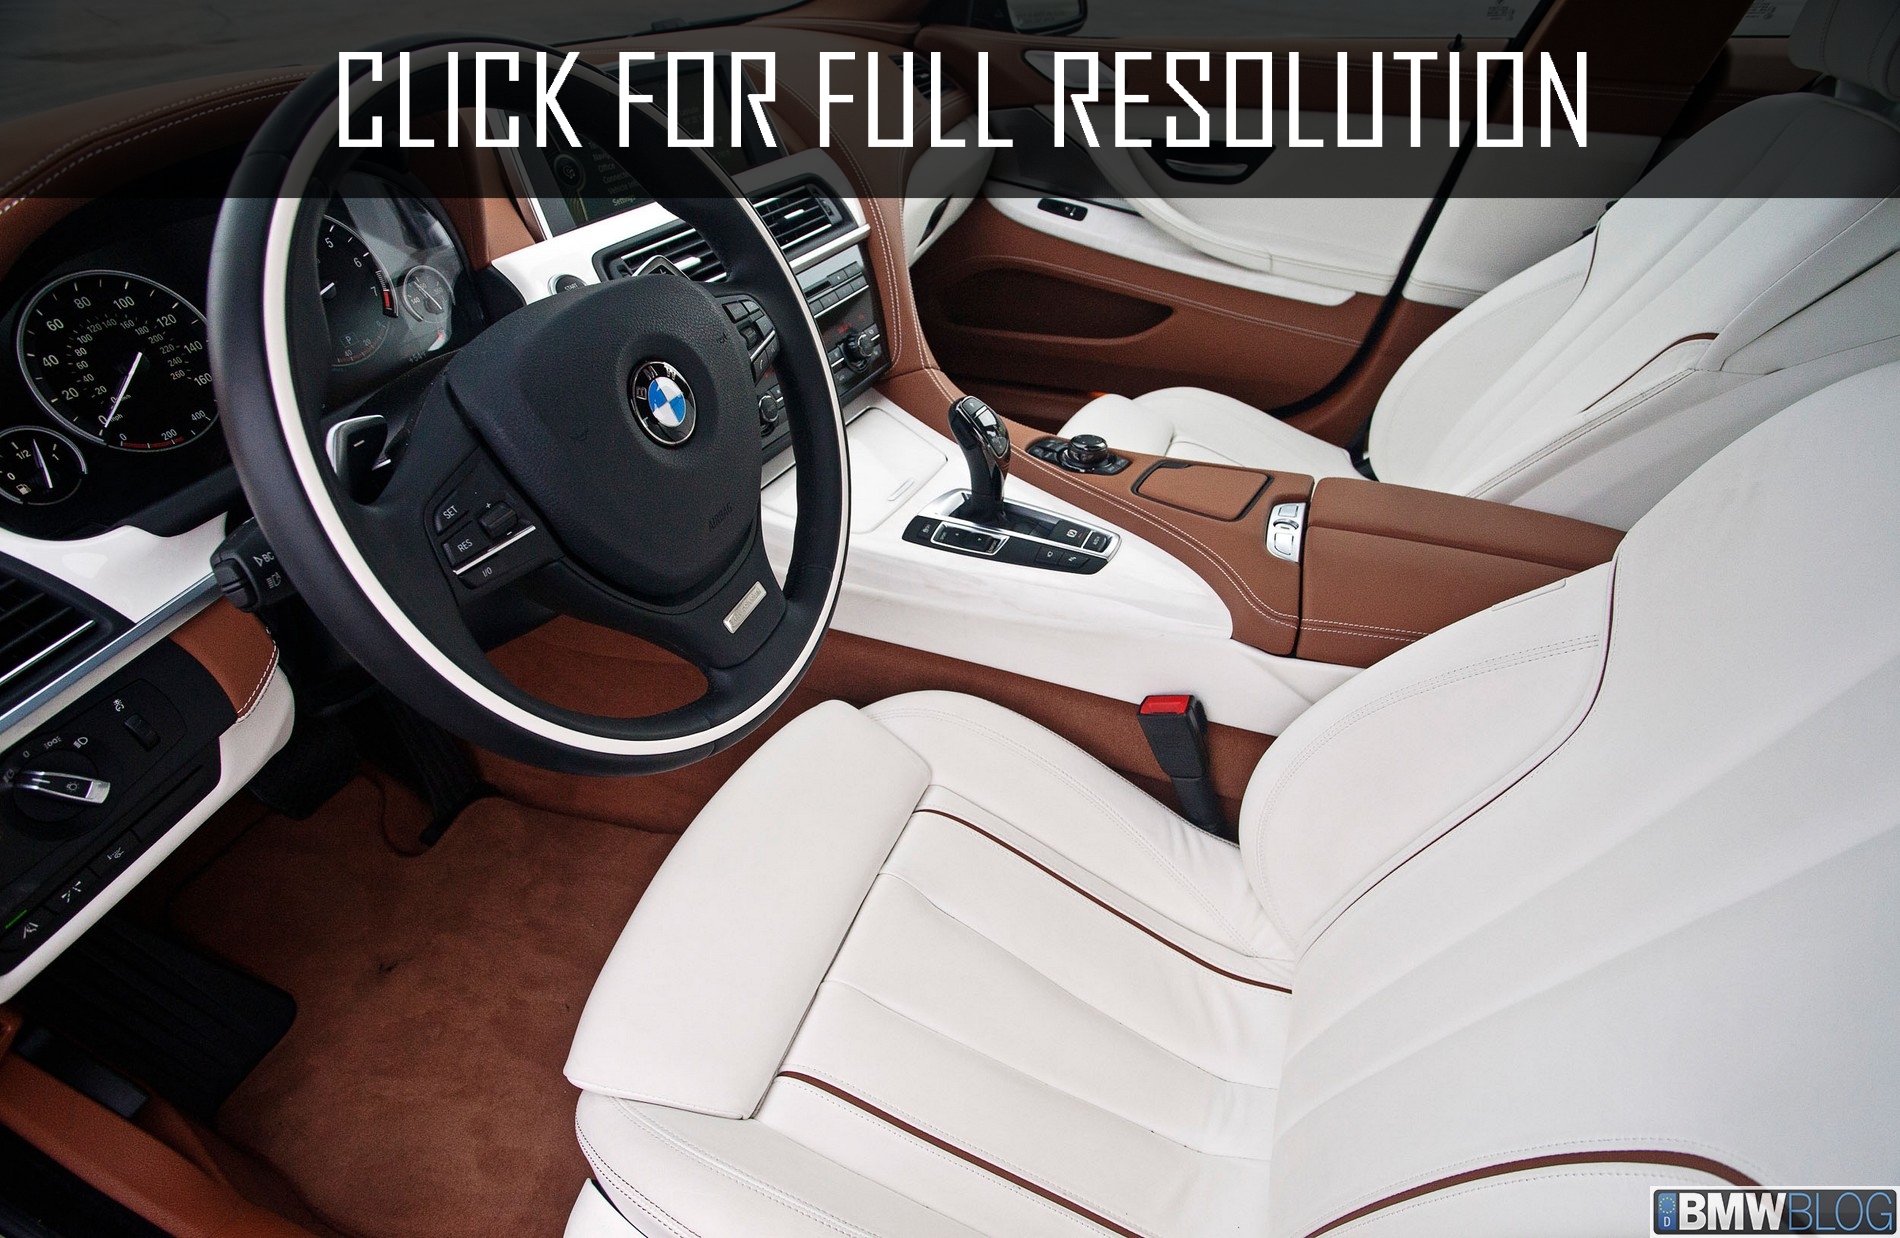 2014 Bmw 650i Gran Coupe Best Image Gallery 13 20 Share